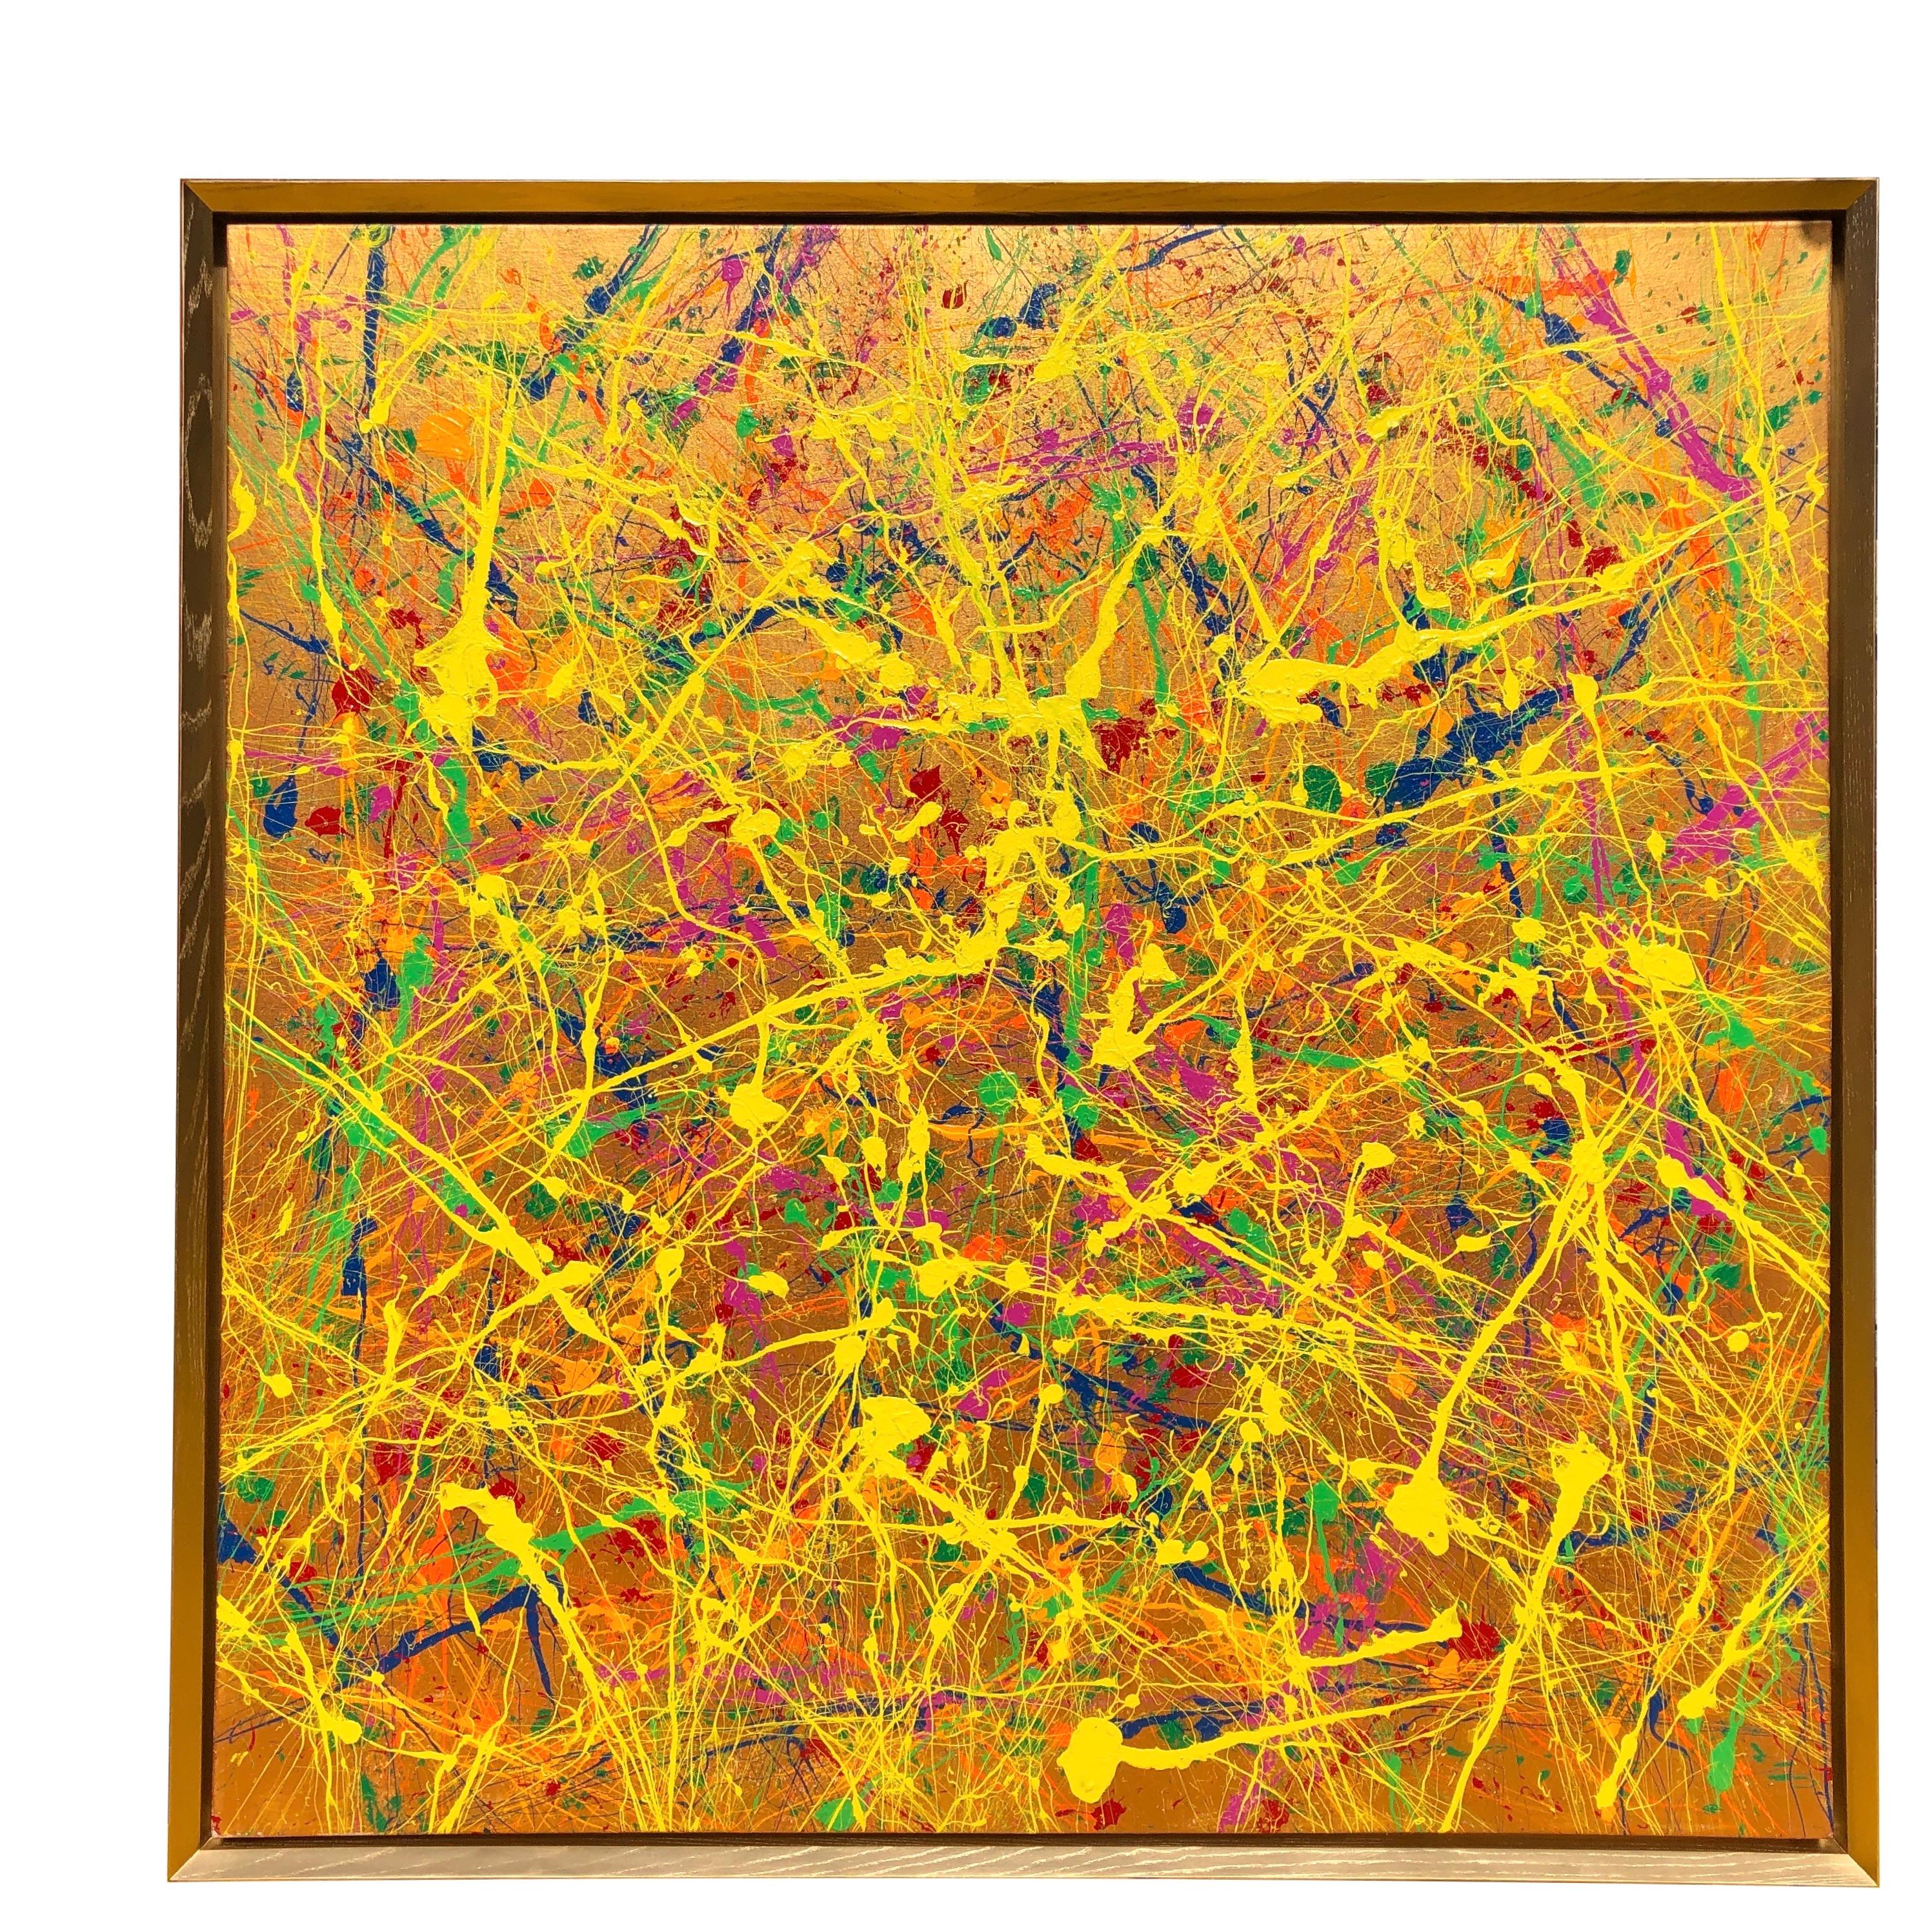 Troy Smith Studio Abstract Painting - Electric Brainwave By Troy Smith With Gilt Frame Fine Art Abstract Art